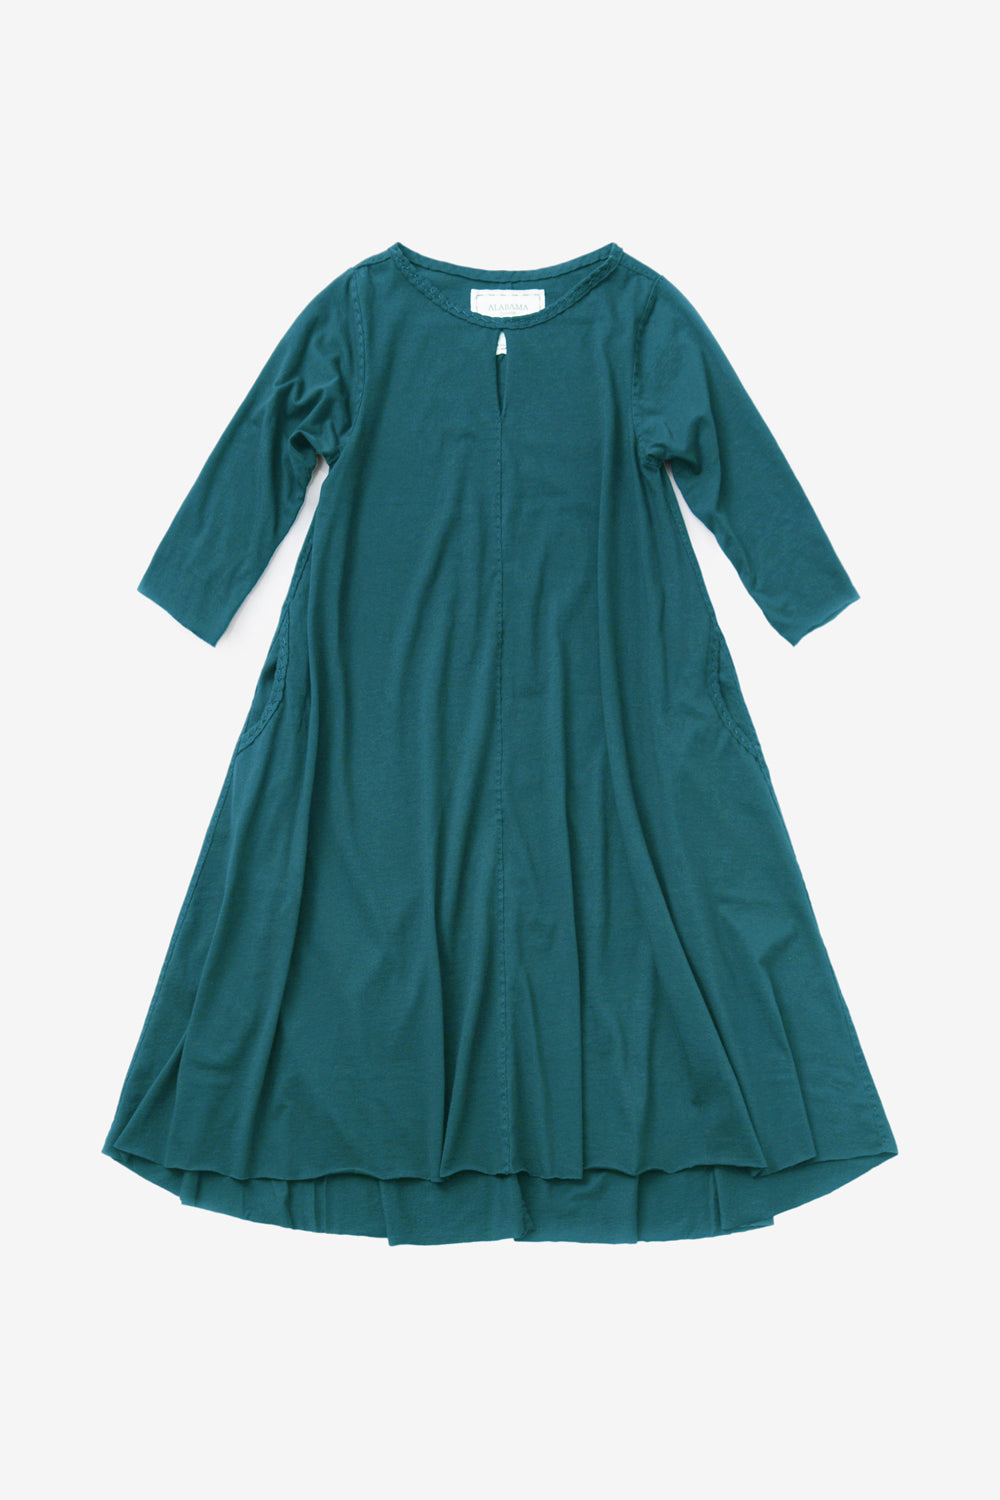 The School of Making Keyhole Dress Kit in Teal.